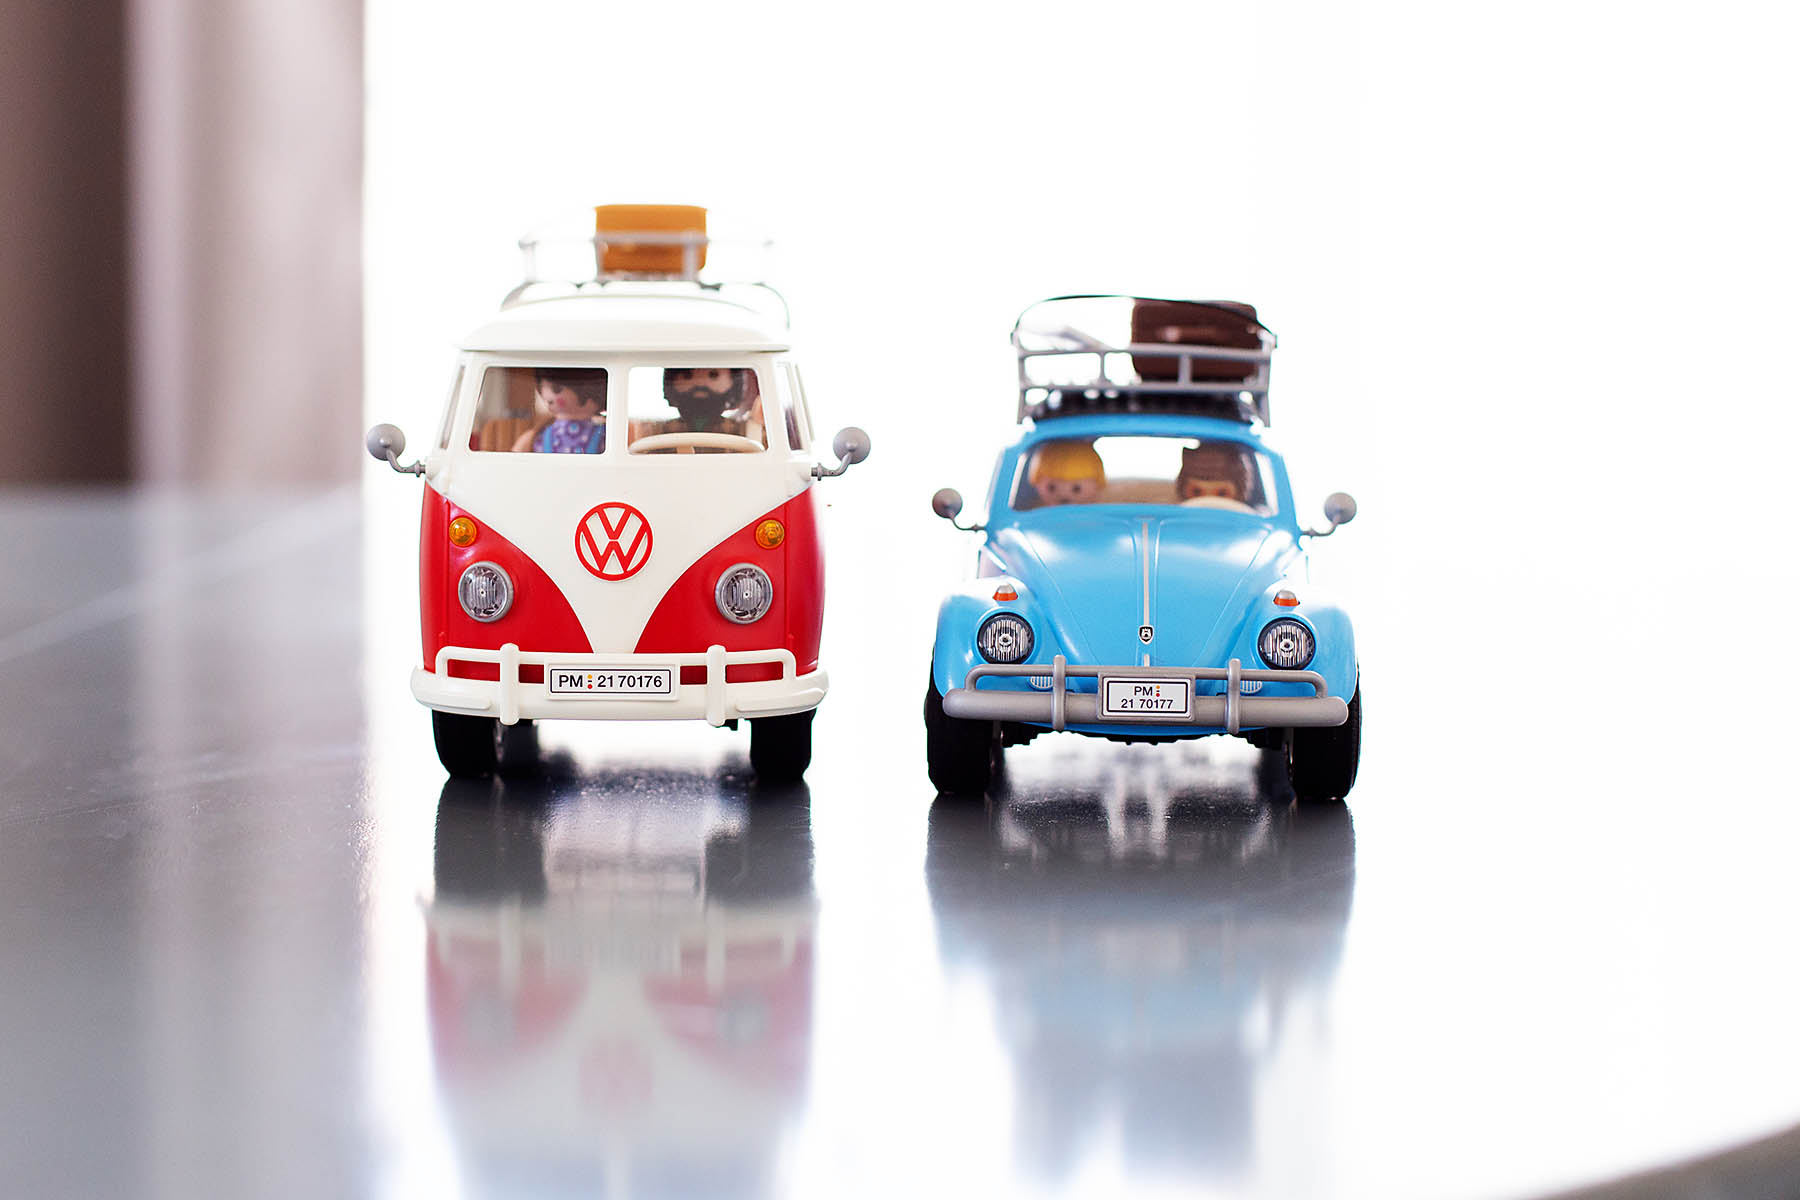 How Cool Are These New PLAYMOBIL® Volkswagen Playsets?! — All for